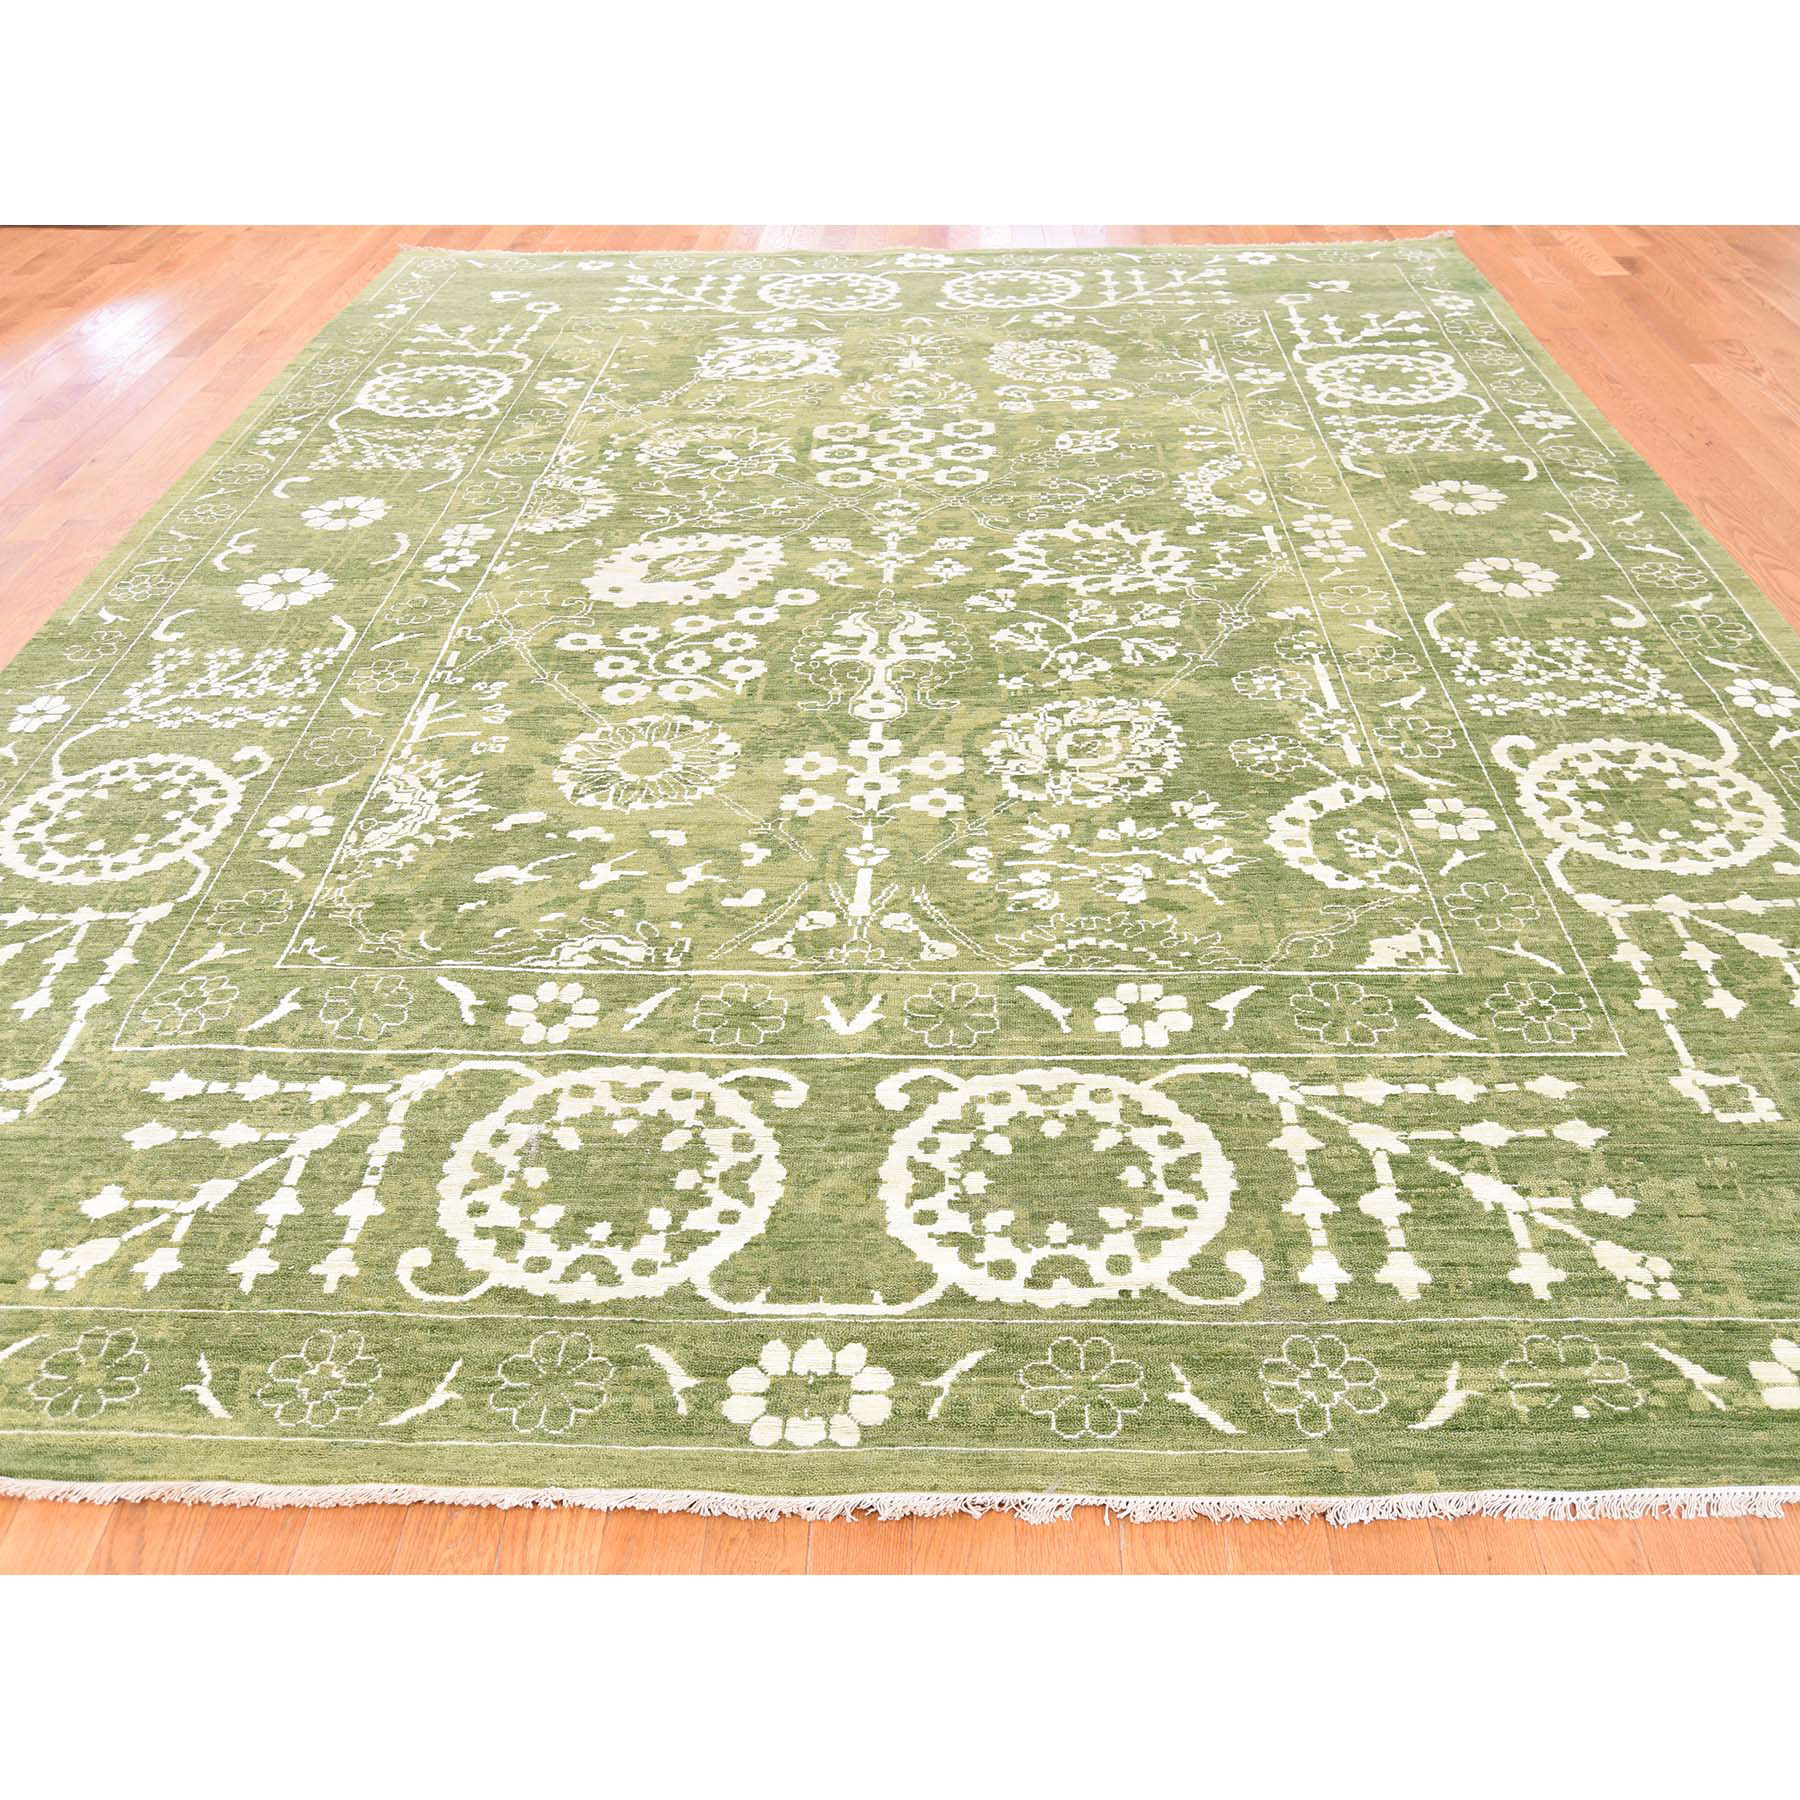 9-x12-2-- Hand-Knotted Wool And Silk Tone on Tone Tabriz Oriental Rug 